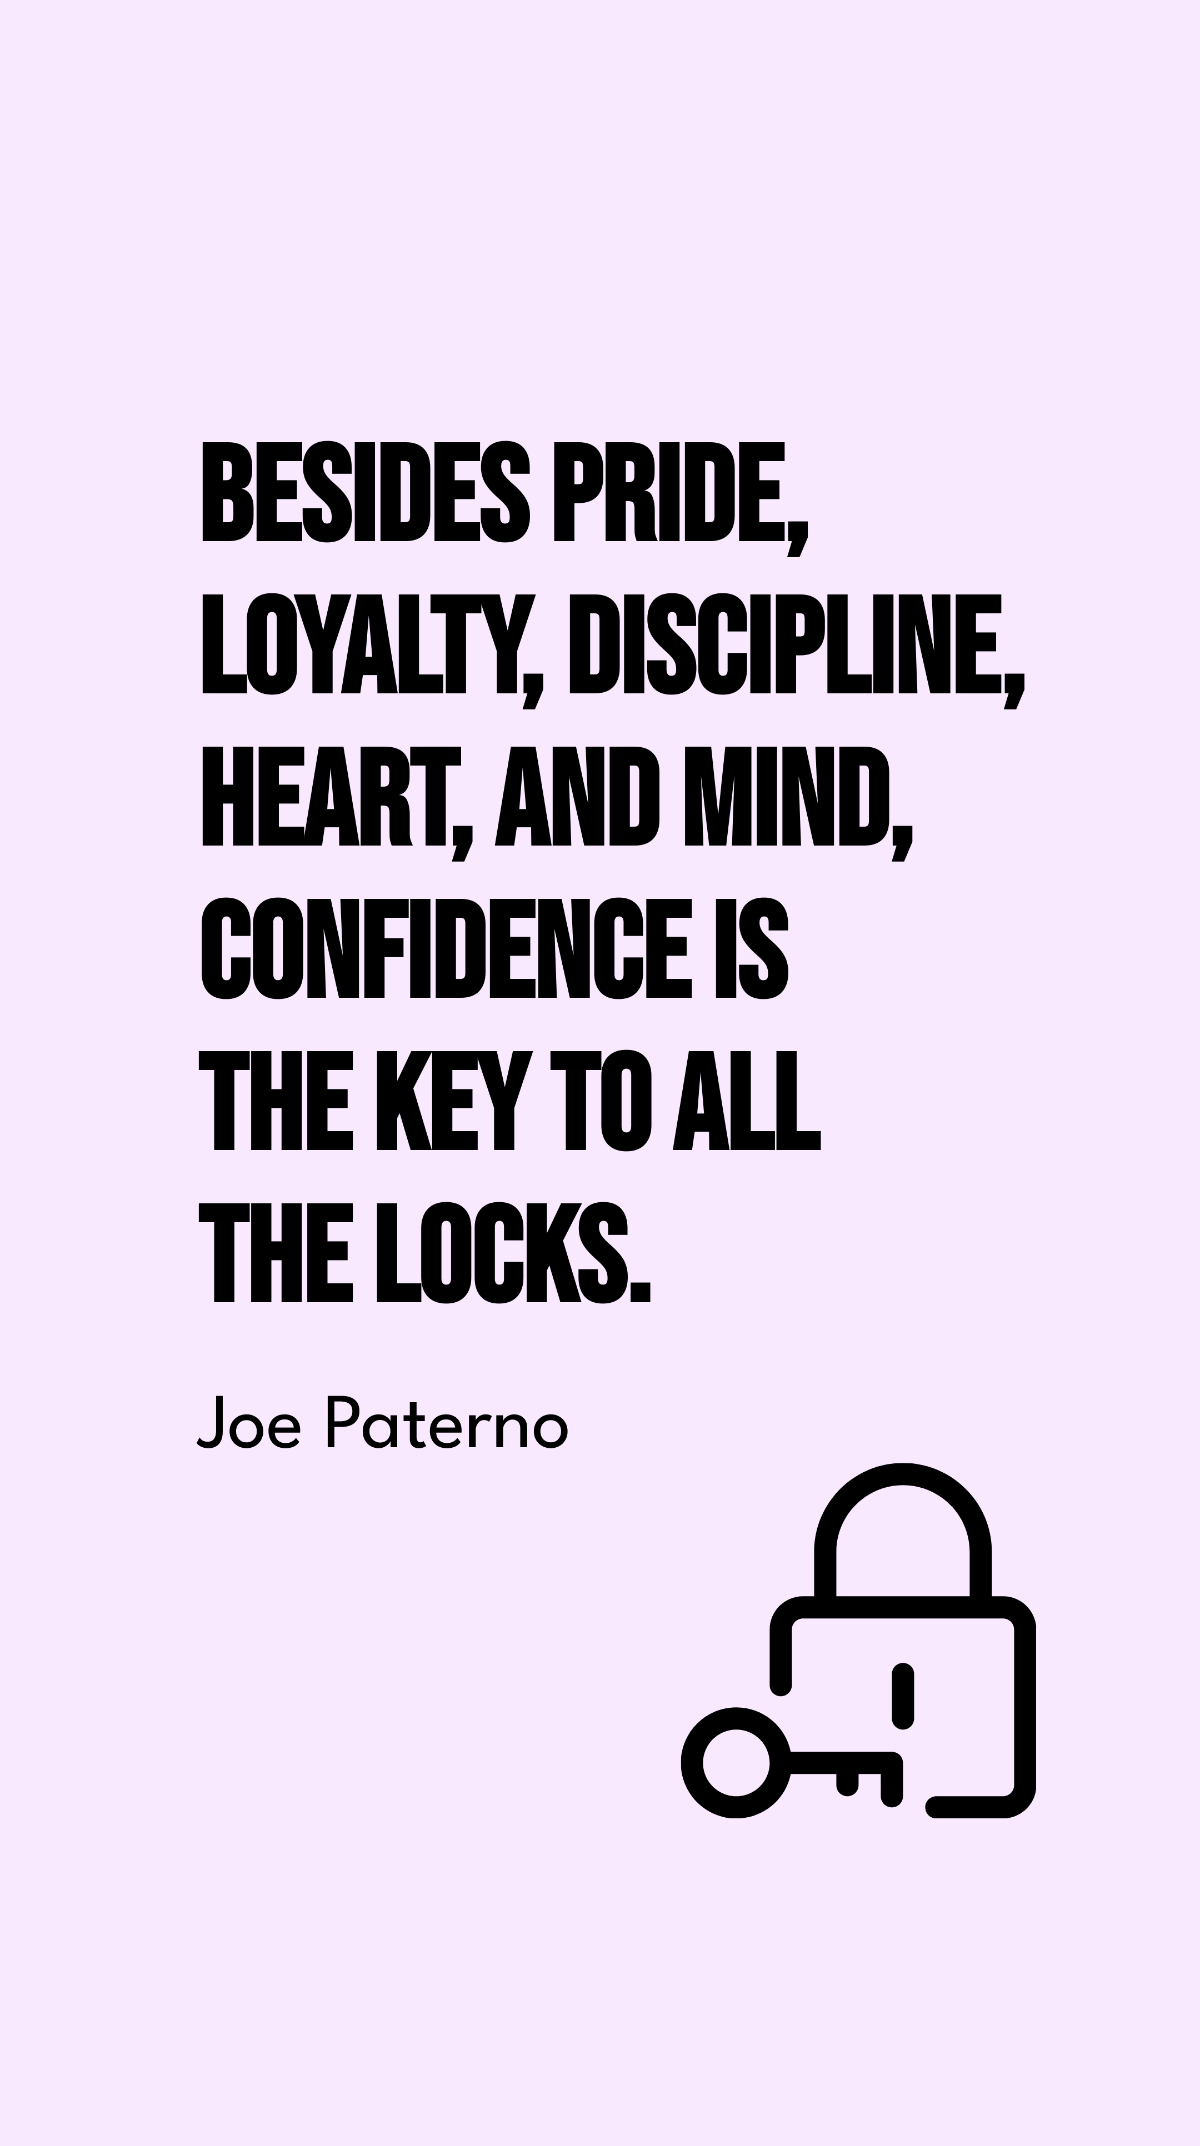 Joe Paterno - Besides pride, loyalty, discipline, heart, and mind, confidence is the key to all the locks.